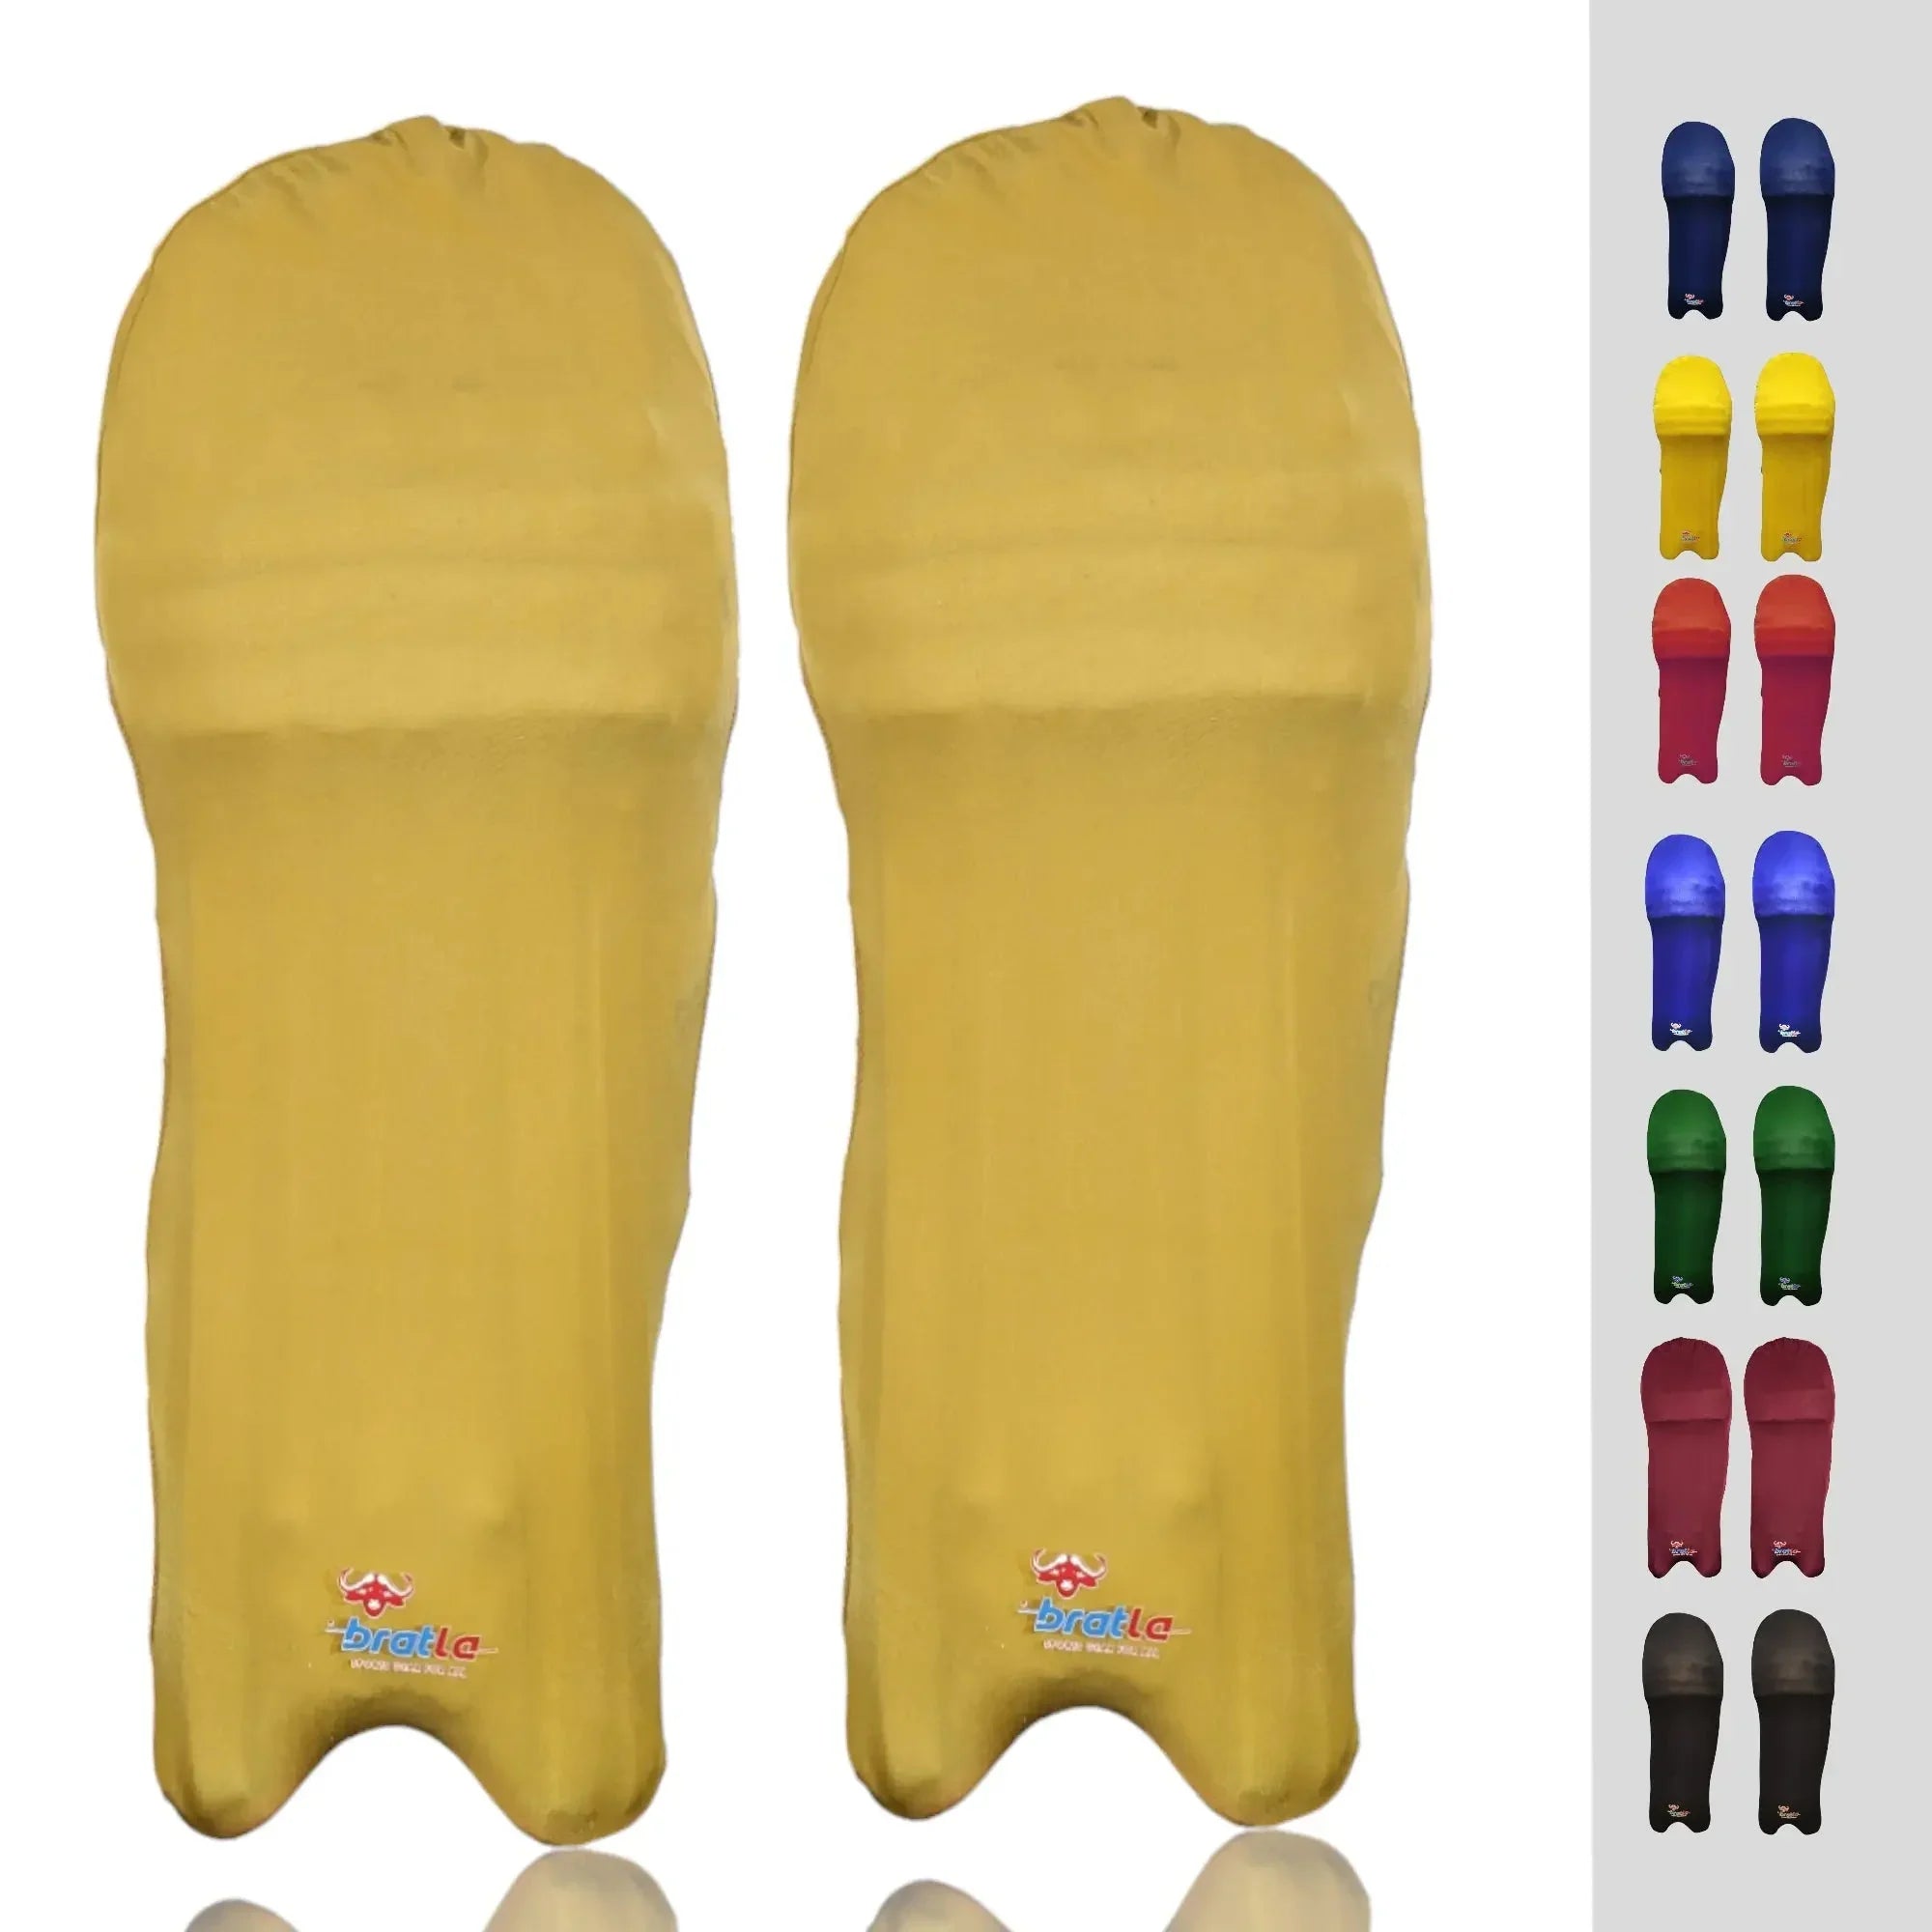 Bratla Cricket Batting Pad Covers Fit Neatly Easily Put On - Gold - PADS - BATTING COVER